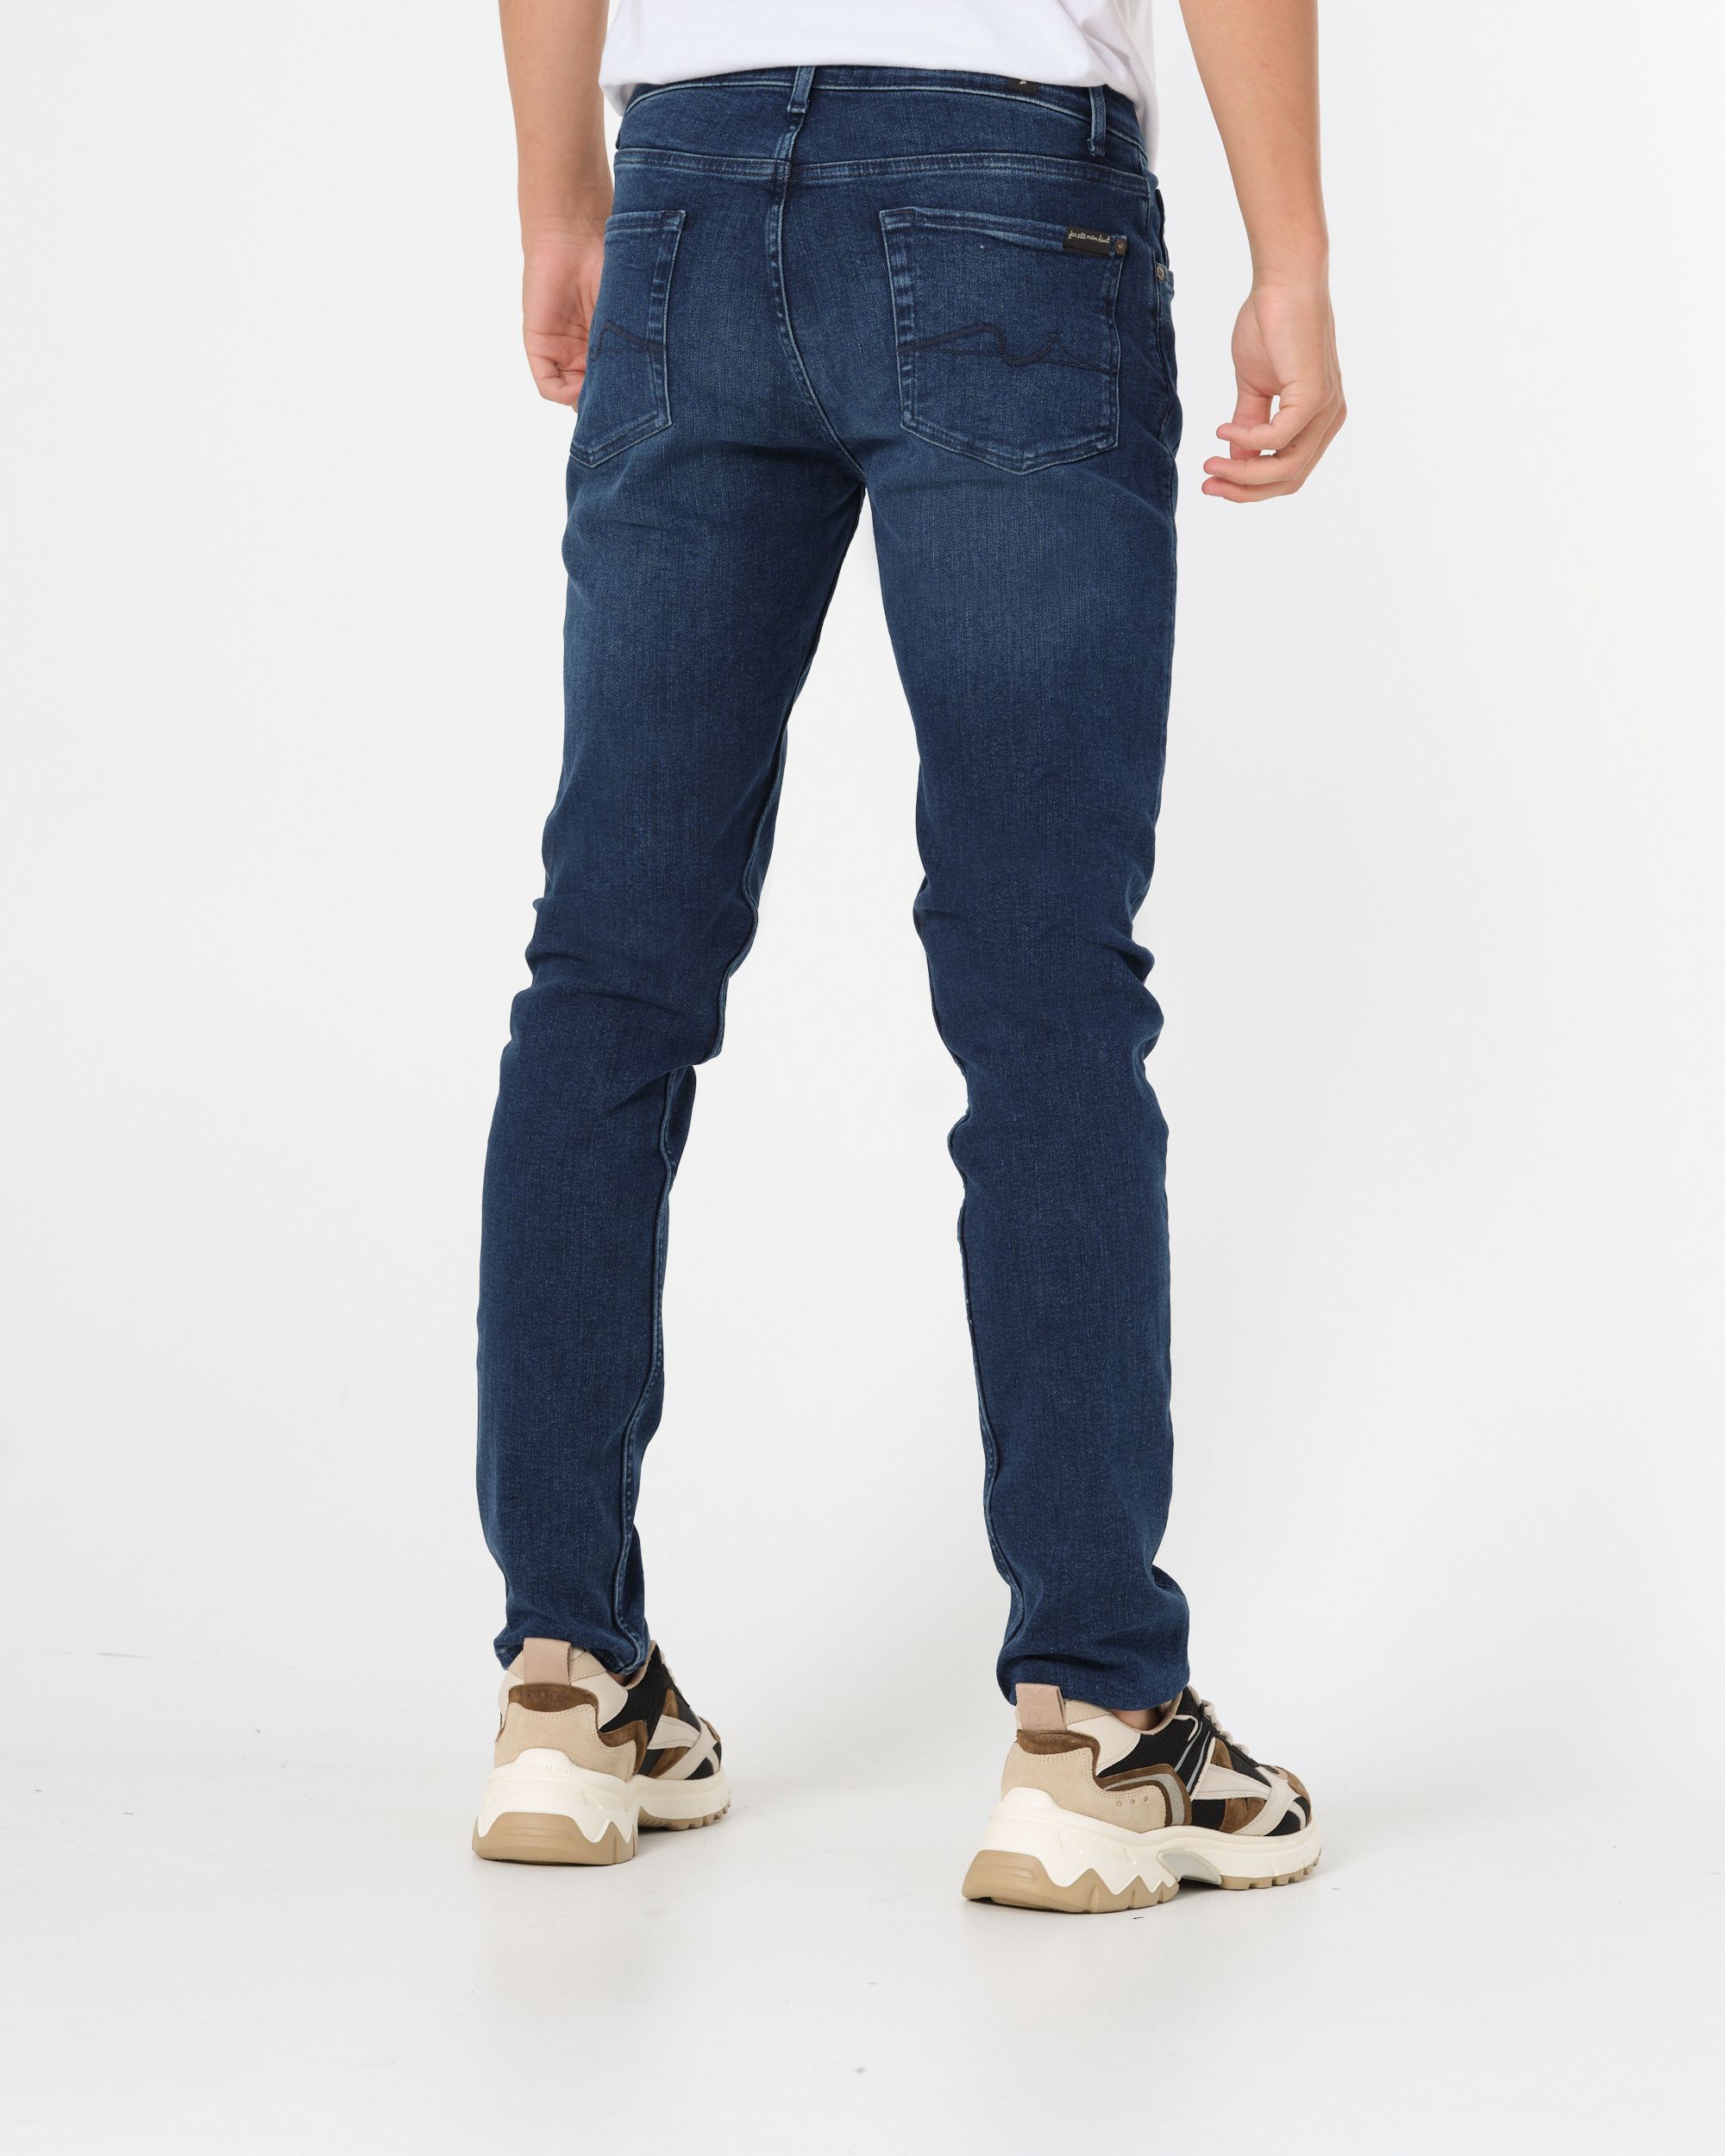 Seven for all mankind Rebus Jeans Donker blauw 089206-001-30